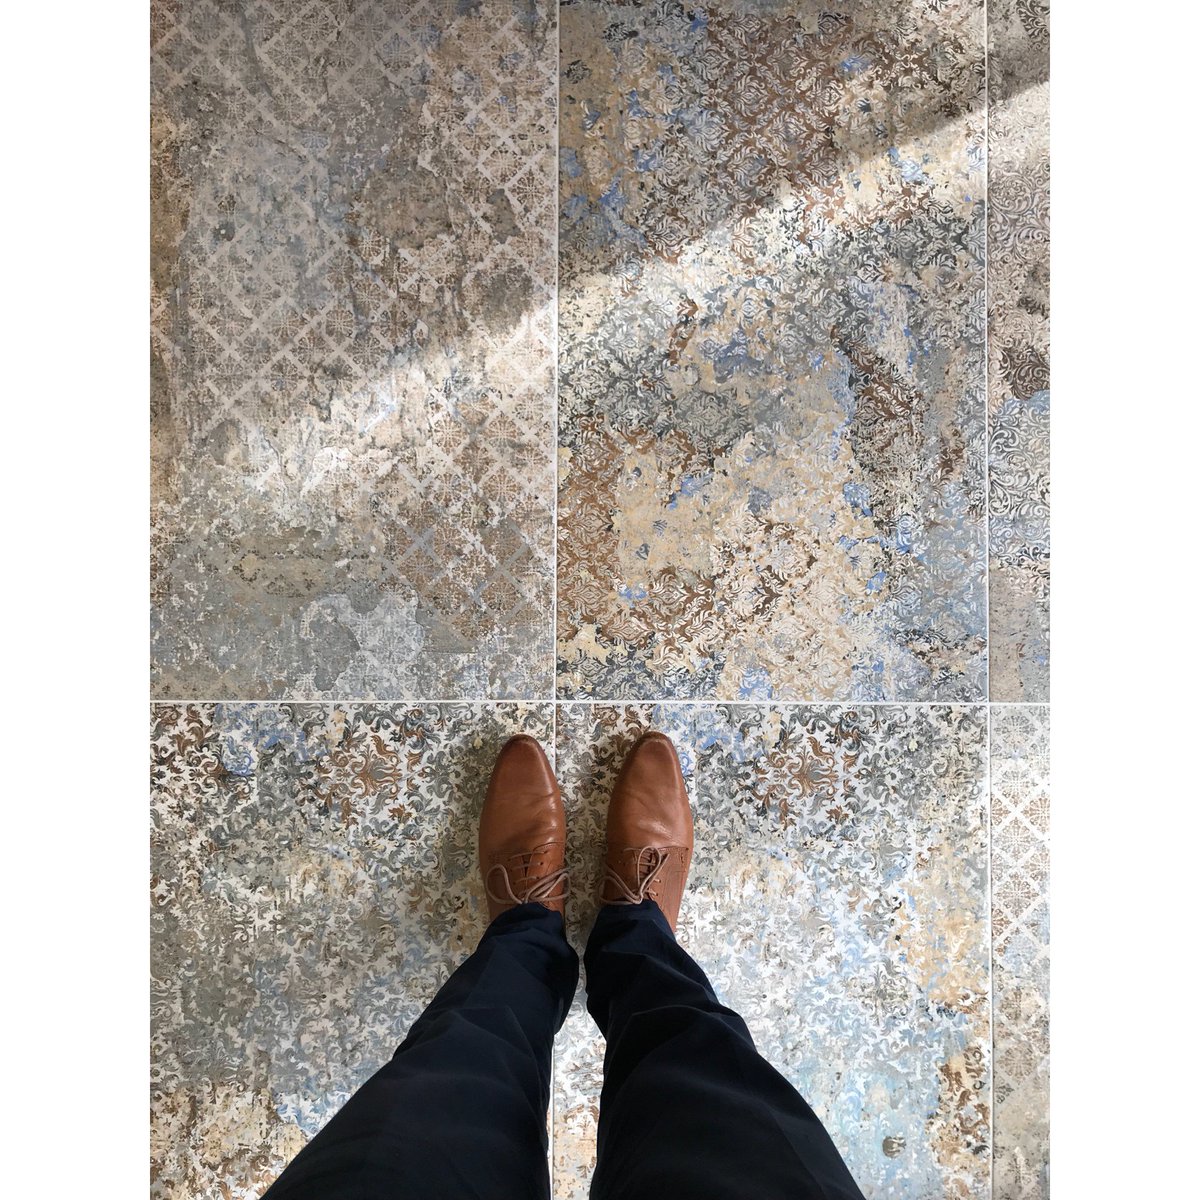 We love this new display in our showroom! It really does have everything - from clean lines, to rustic finishes, luxurious furniture and industrial touches. Our designer even drew inspiration from his shoes for the walnut worktop as the colour complements the tiles perfectly!